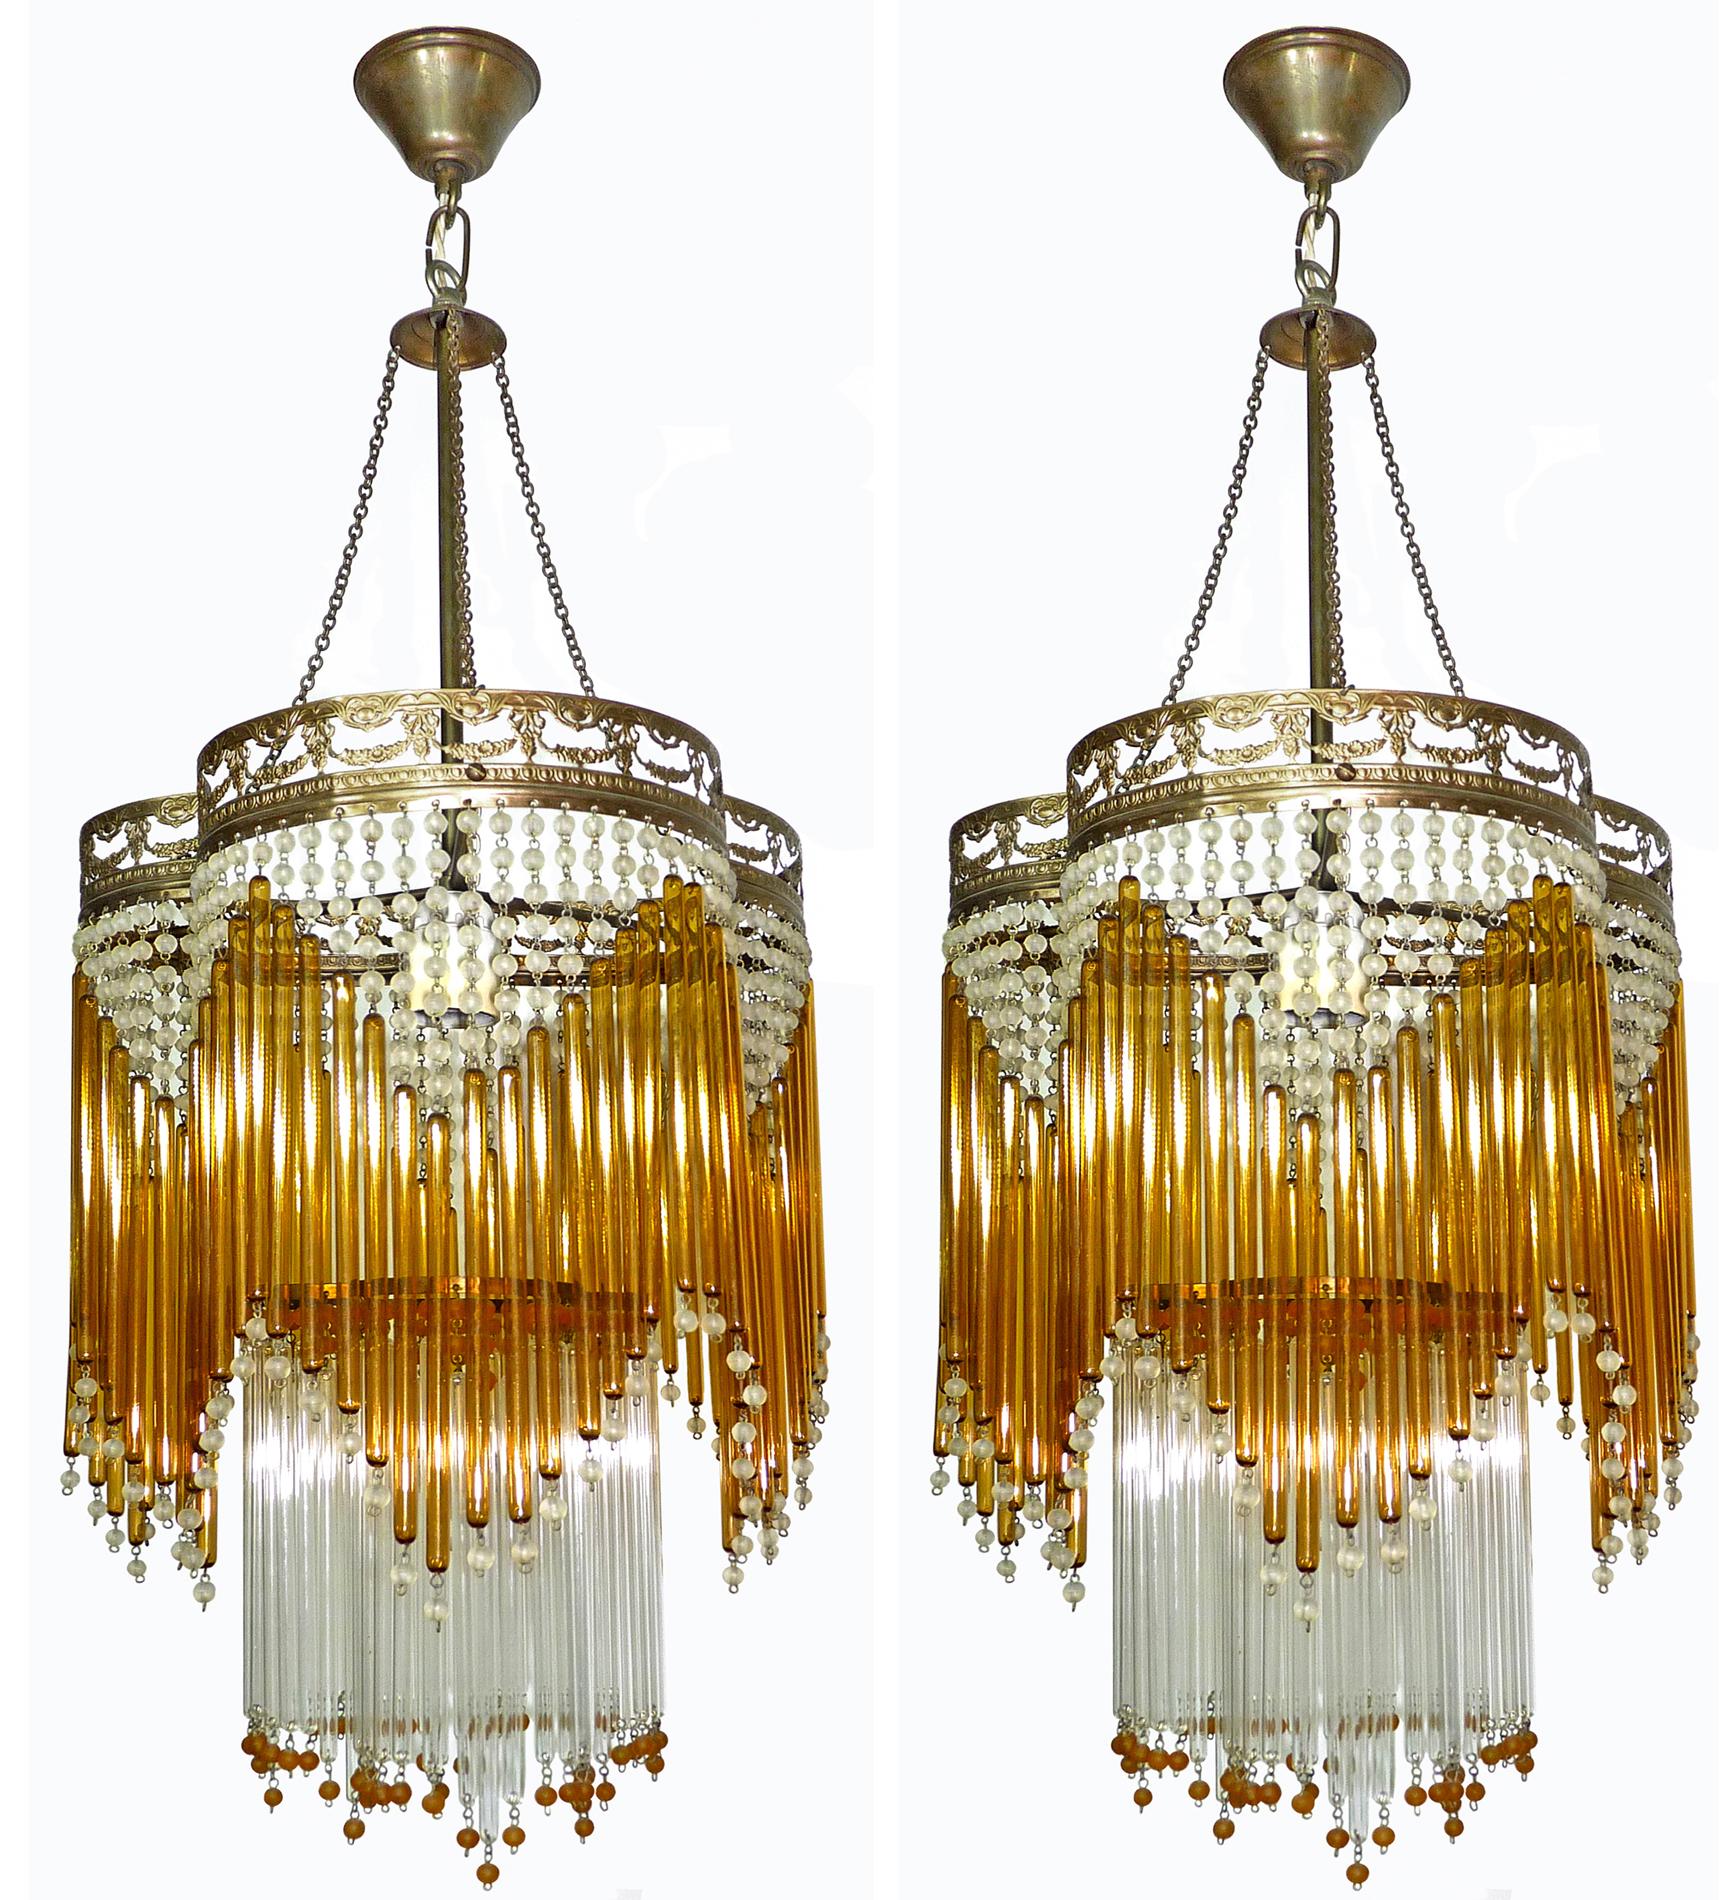 Beautiful pair of Italian midcentury in clear and amber Murano beaded glass Art Deco / Art Nouveau chandeliers.
Measures:
Diameter 30 cm
Height 87 cm
One light bulb each E27/ good working condition/European wiring.
Age patina.
 